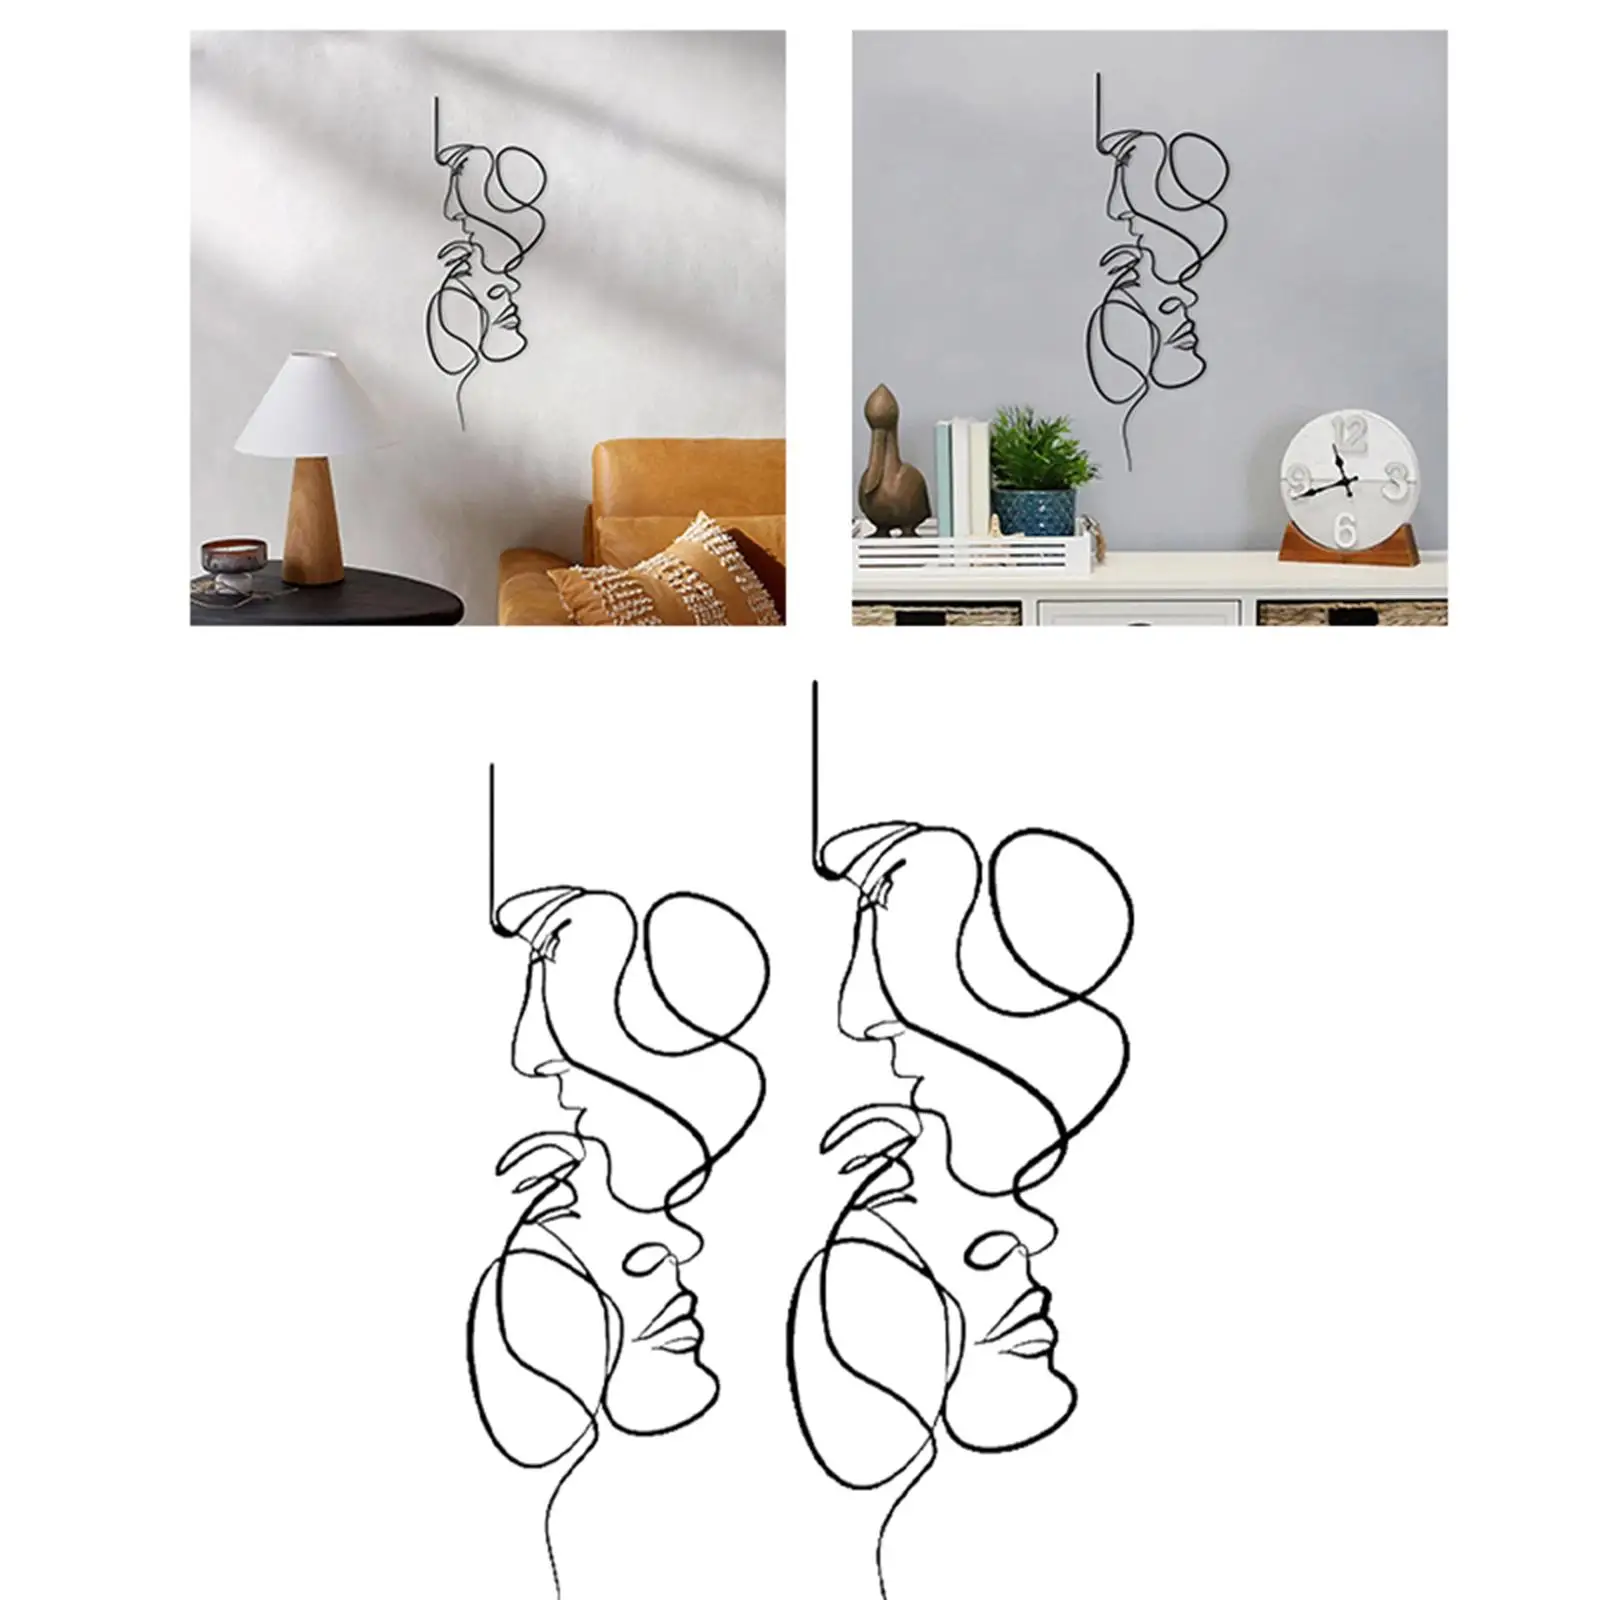 Hanging Sculptures Background Lover Decorative Home Decors Couple Metal Wall Art Decors Silhouette Statues for Bedroom Farmhouse